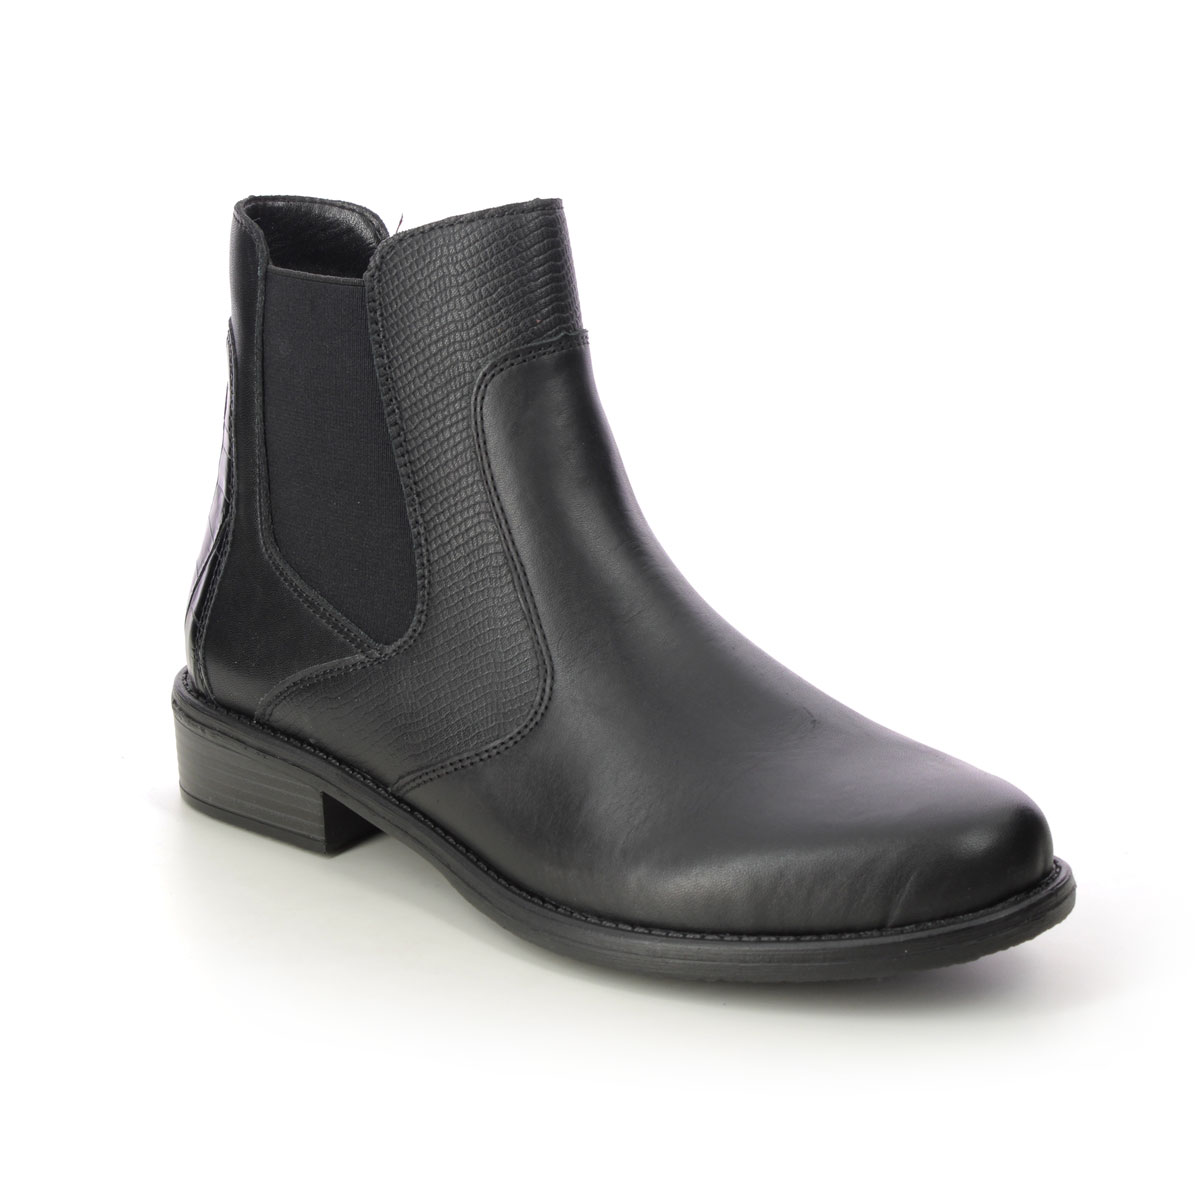 Remonte Peechlap Black Leather Womens Chelsea Boots D0F70-01 In Size 42 In Plain Black Leather